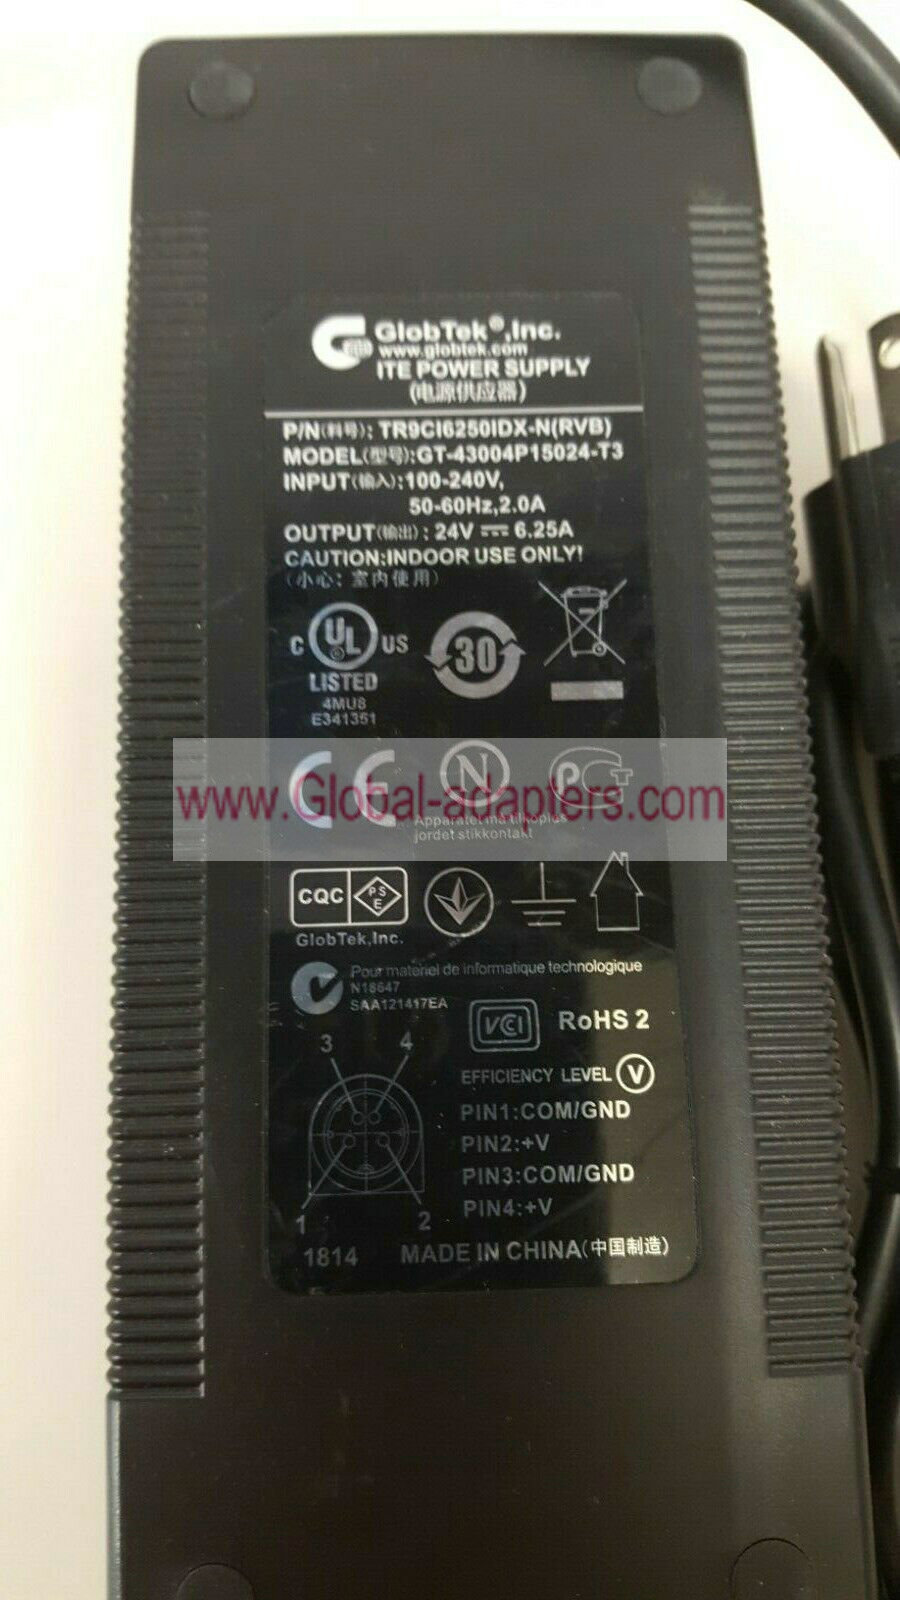 New GlobTek GT-43004P15024-T3 ITE Power Supply TR9CI6250IDX-N 24V 6.25A AC ADAPTER 4 PIN - Click Image to Close